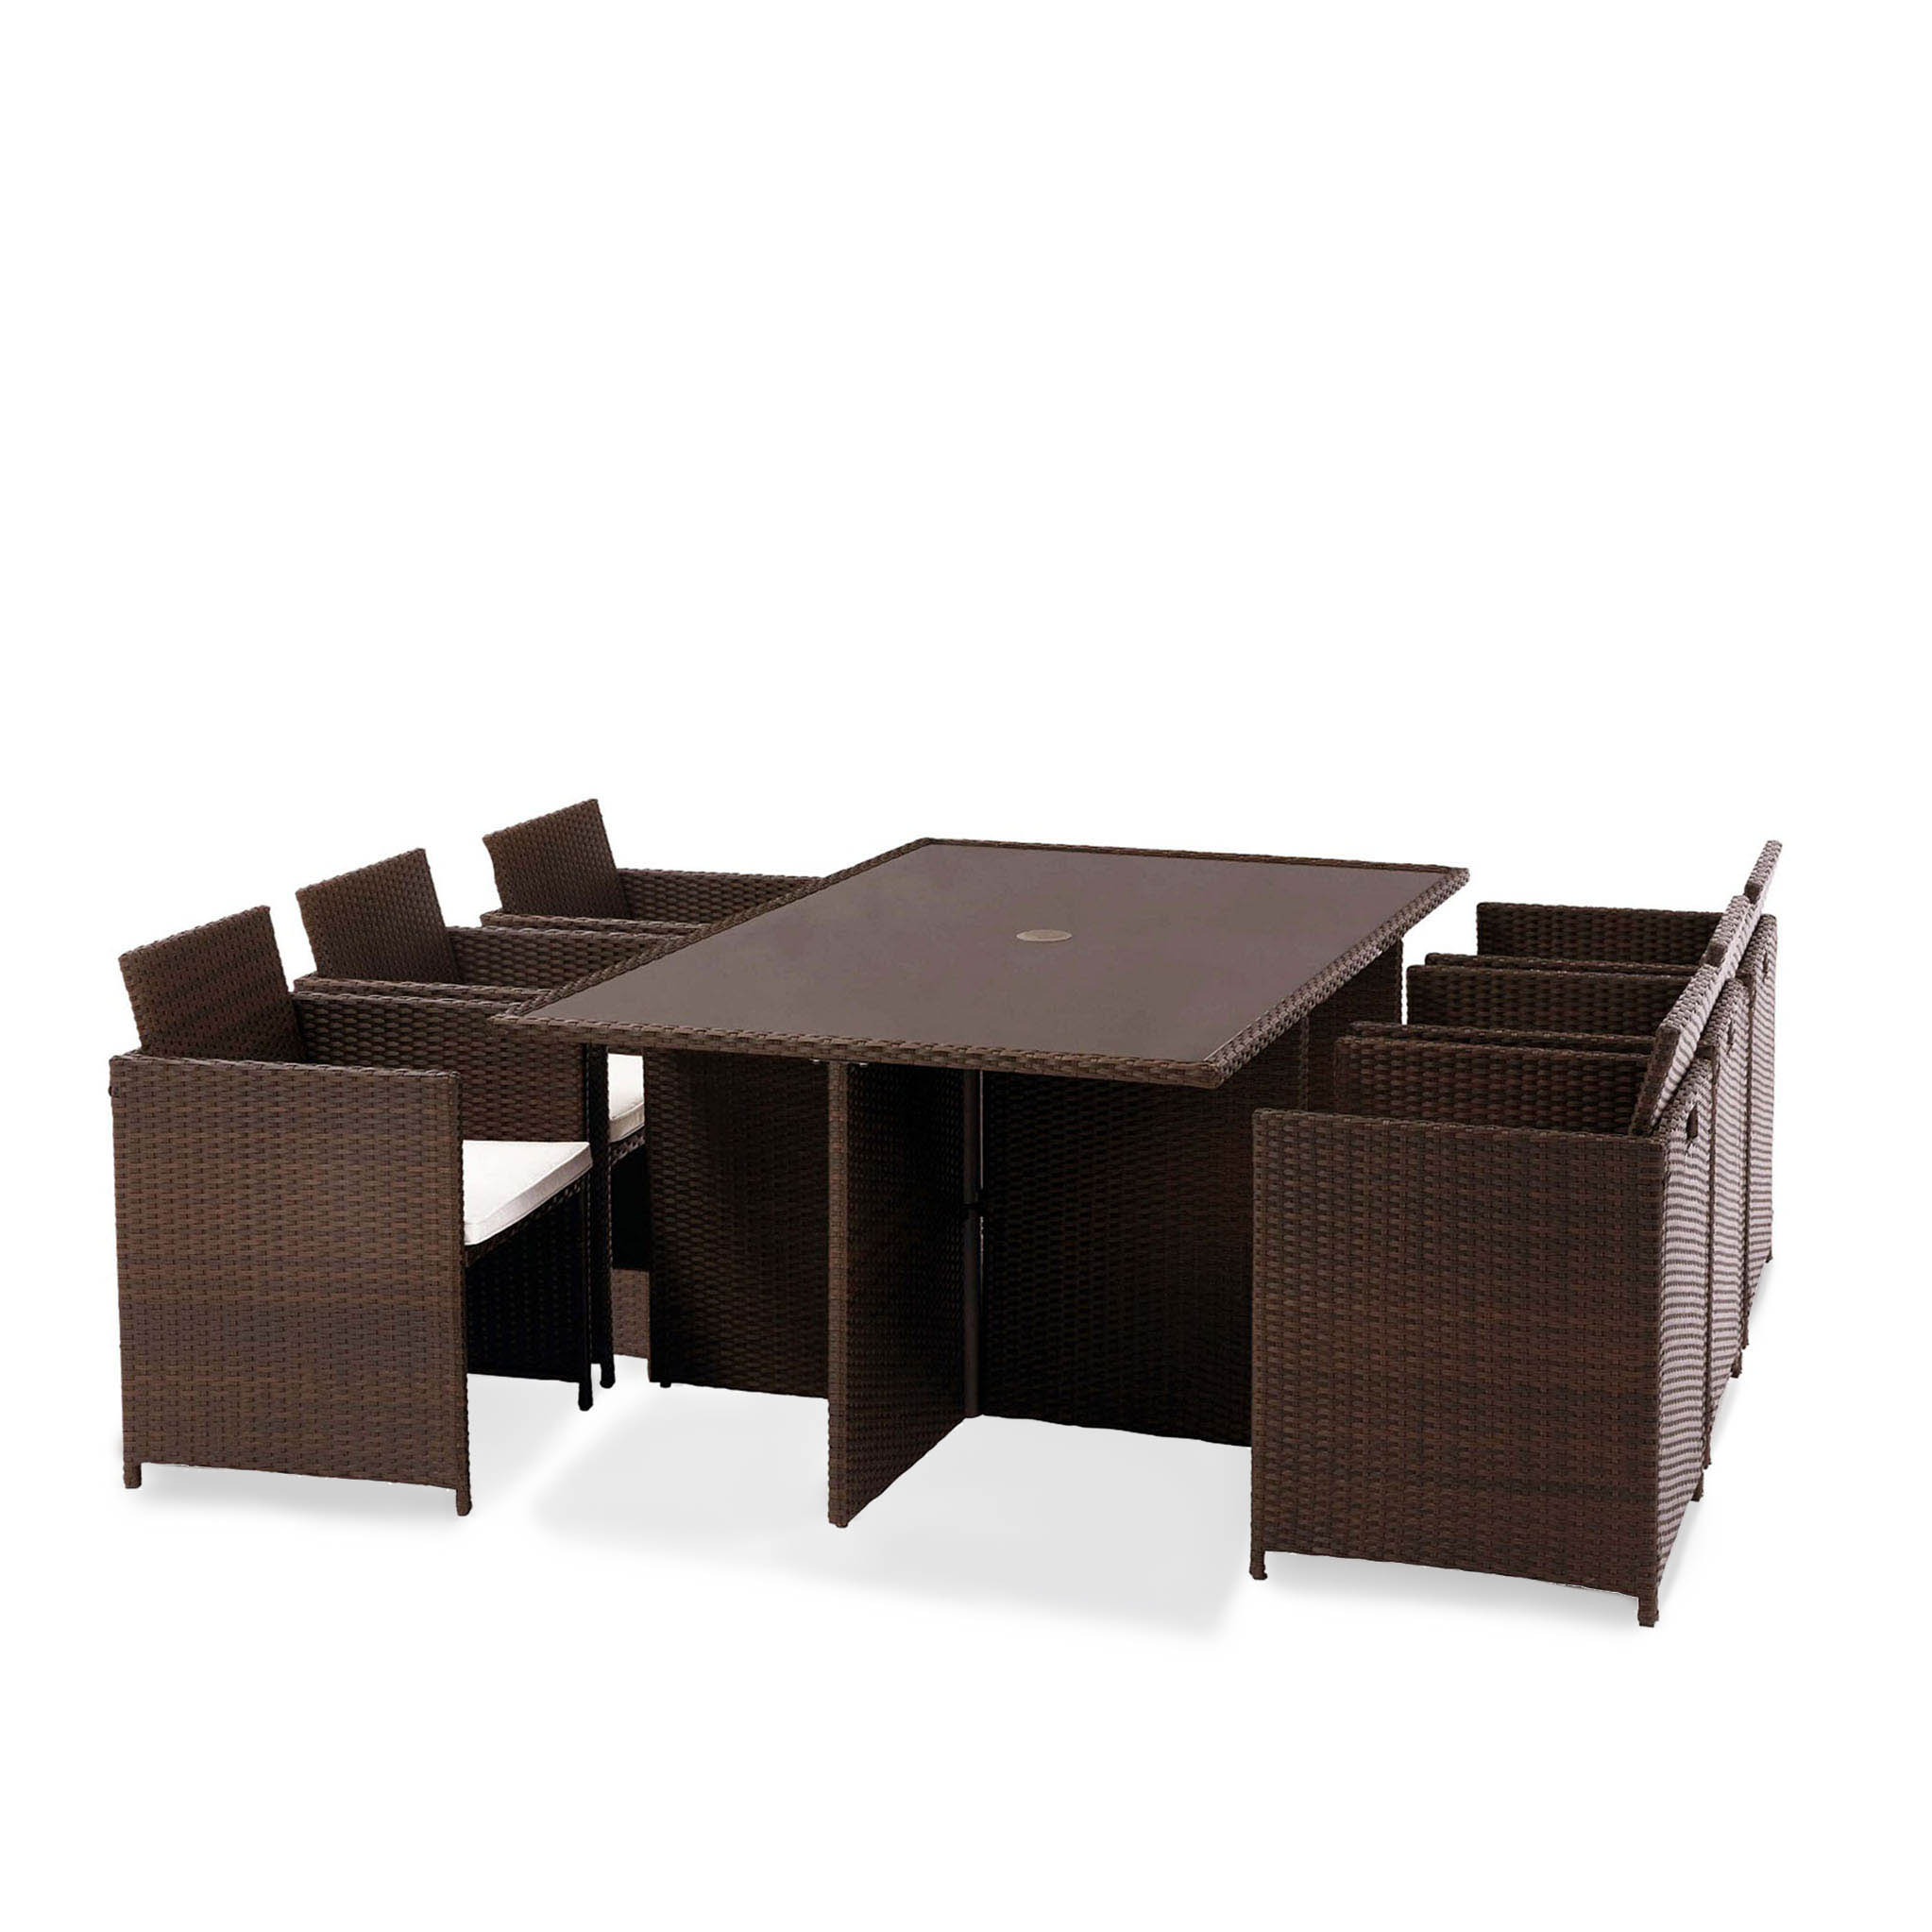 Vada Outdoor Living 6 Seater Rattan Cube Dining Set For Garden